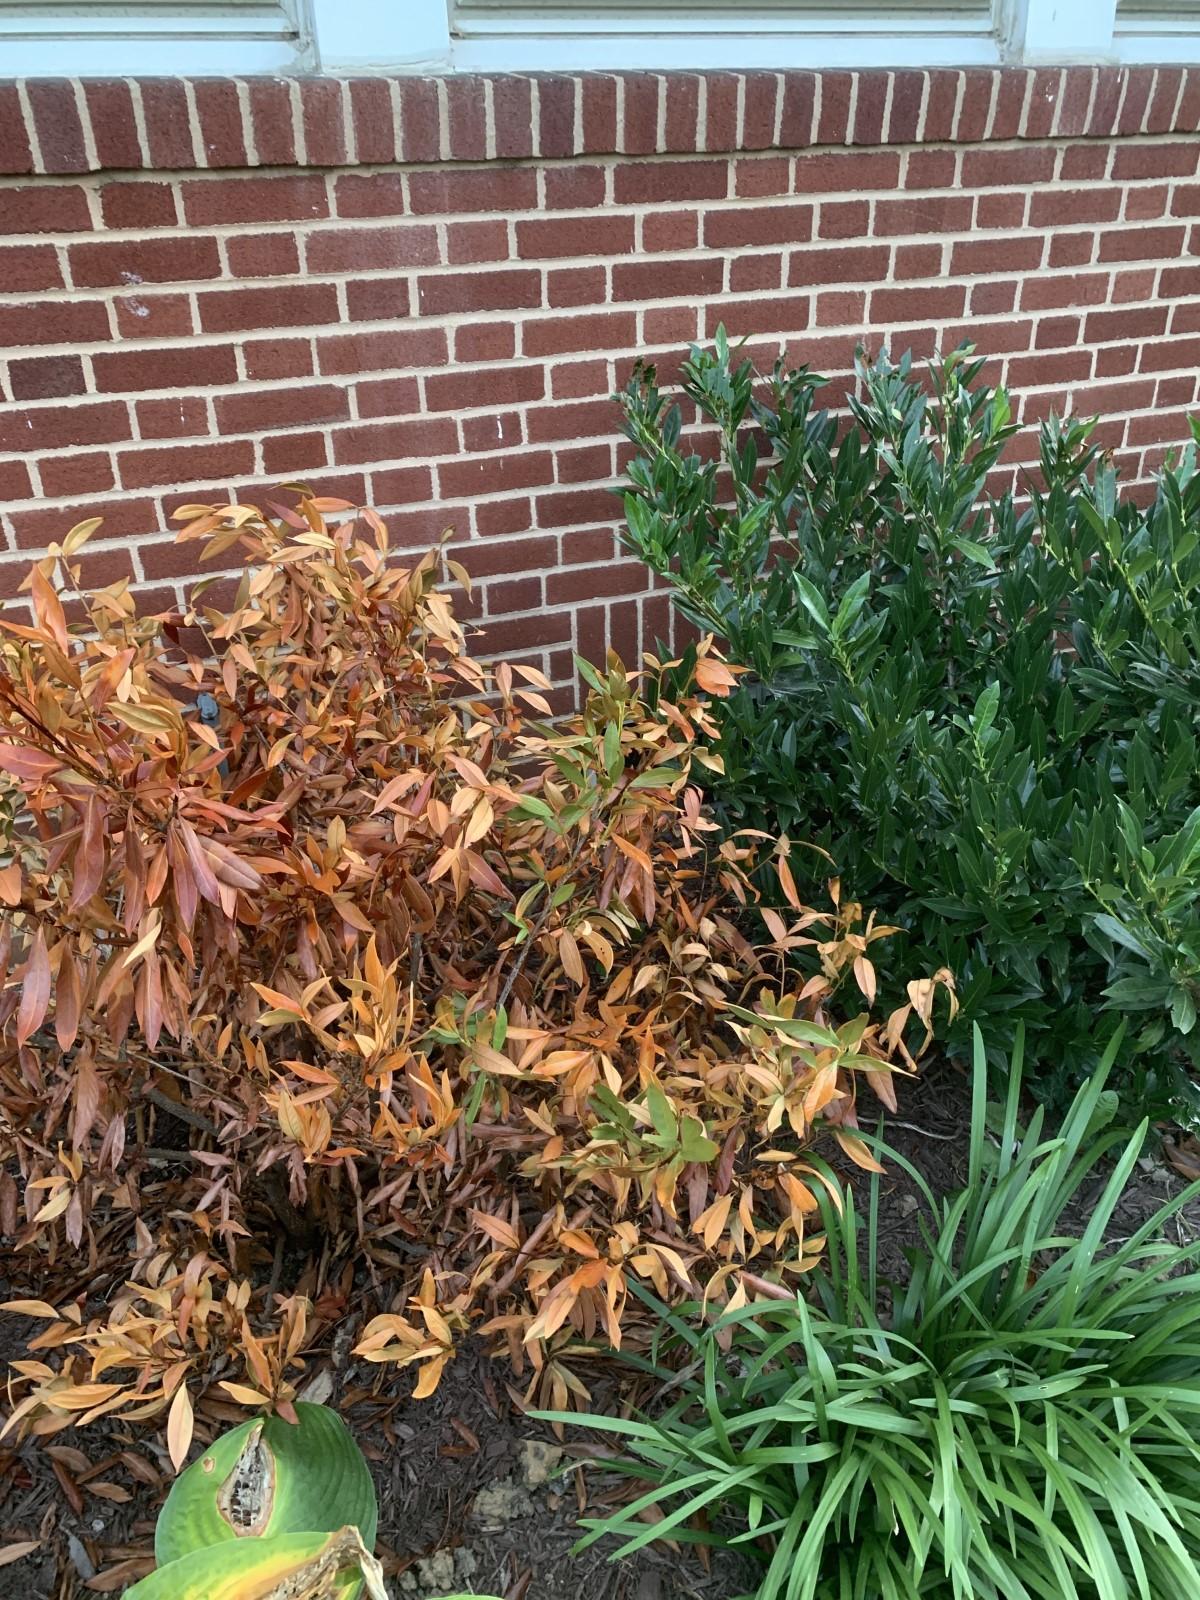 Dead cherry laurel shrub with brown leaves